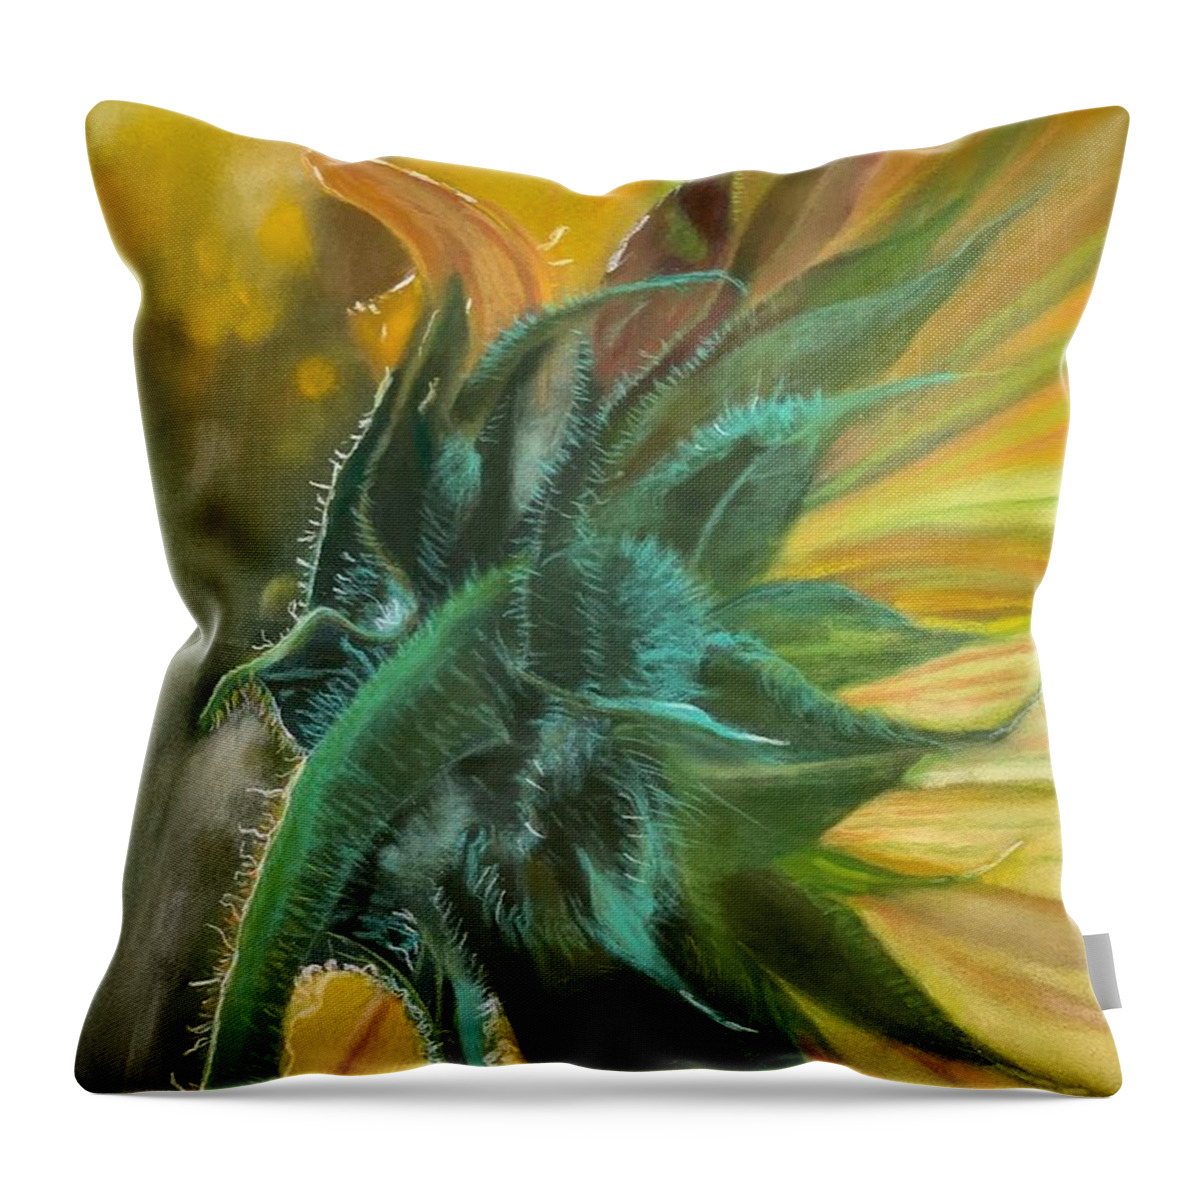 Sunrays Throw Pillow featuring the painting Reaching for the Sun by Juliette Becker